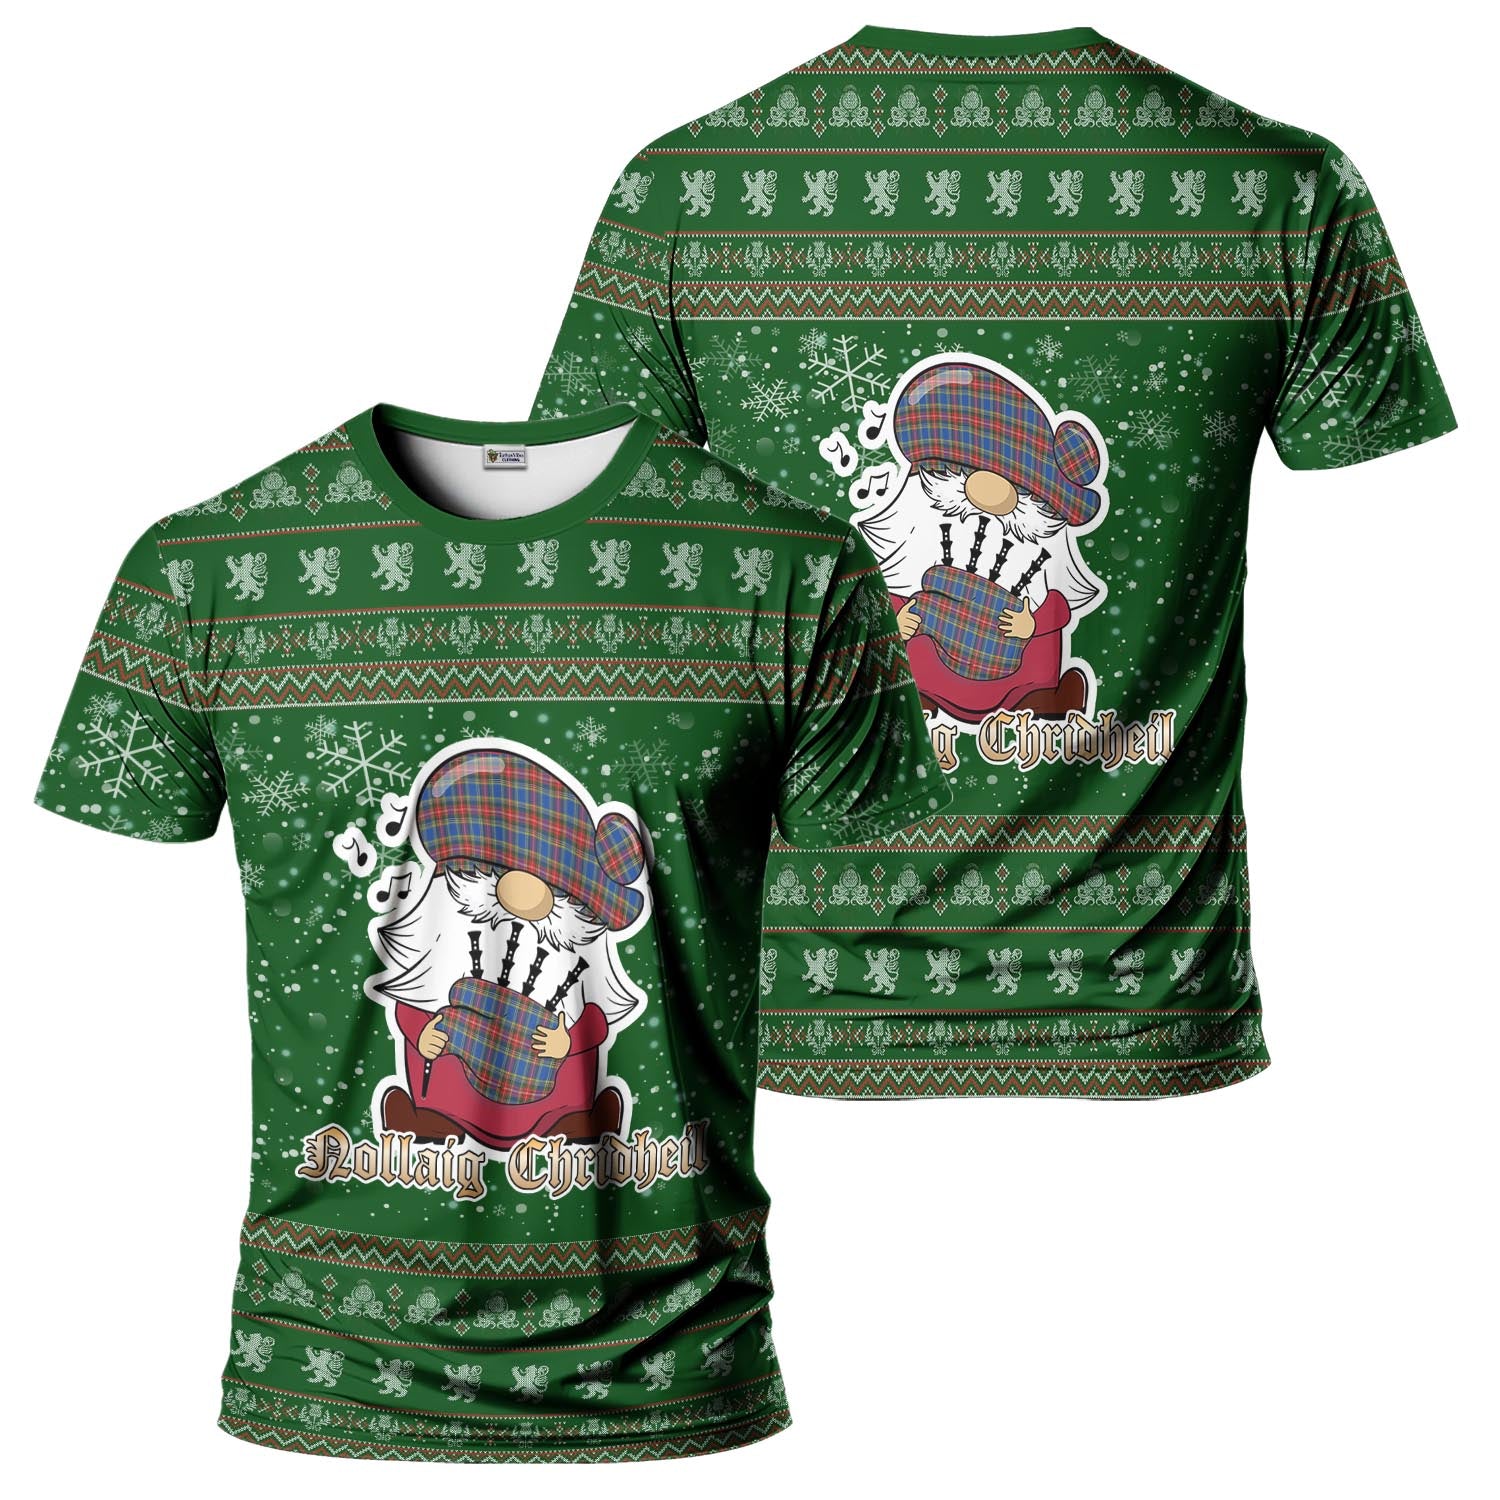 MacBeth Clan Christmas Family T-Shirt with Funny Gnome Playing Bagpipes Men's Shirt Green - Tartanvibesclothing